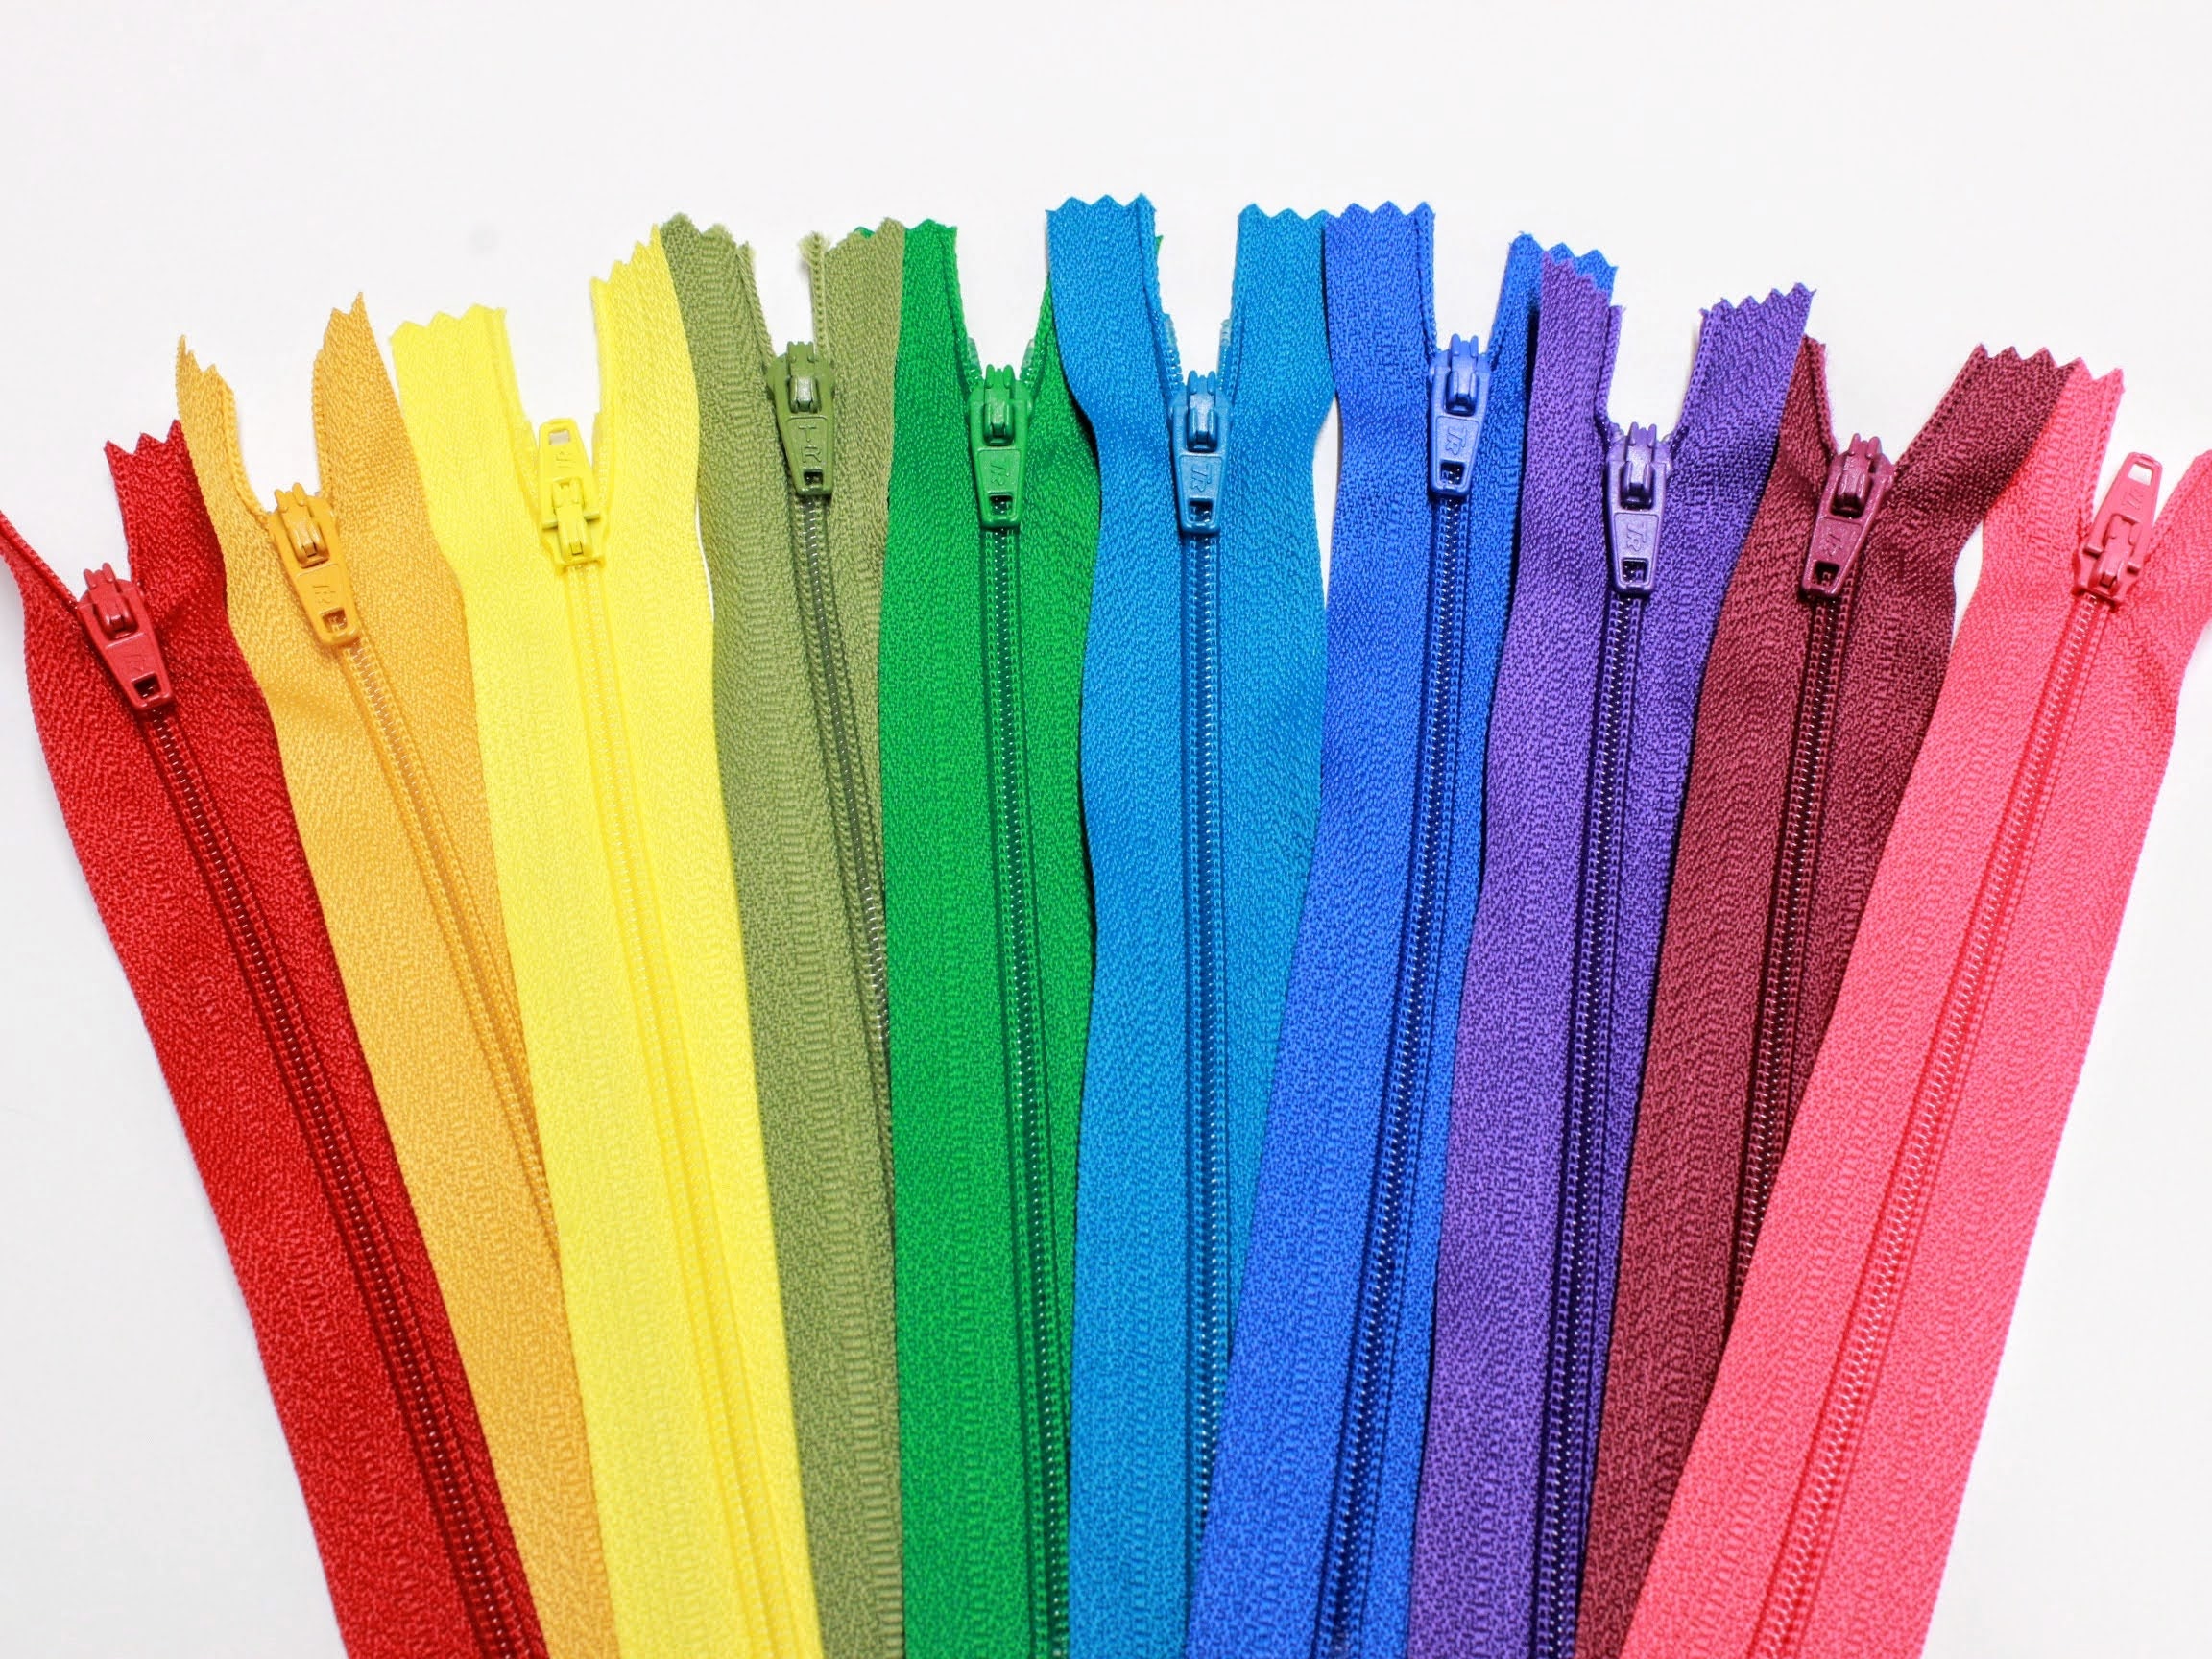  Wonesifee Zippers Colorful Resin 14pcs Zippers with